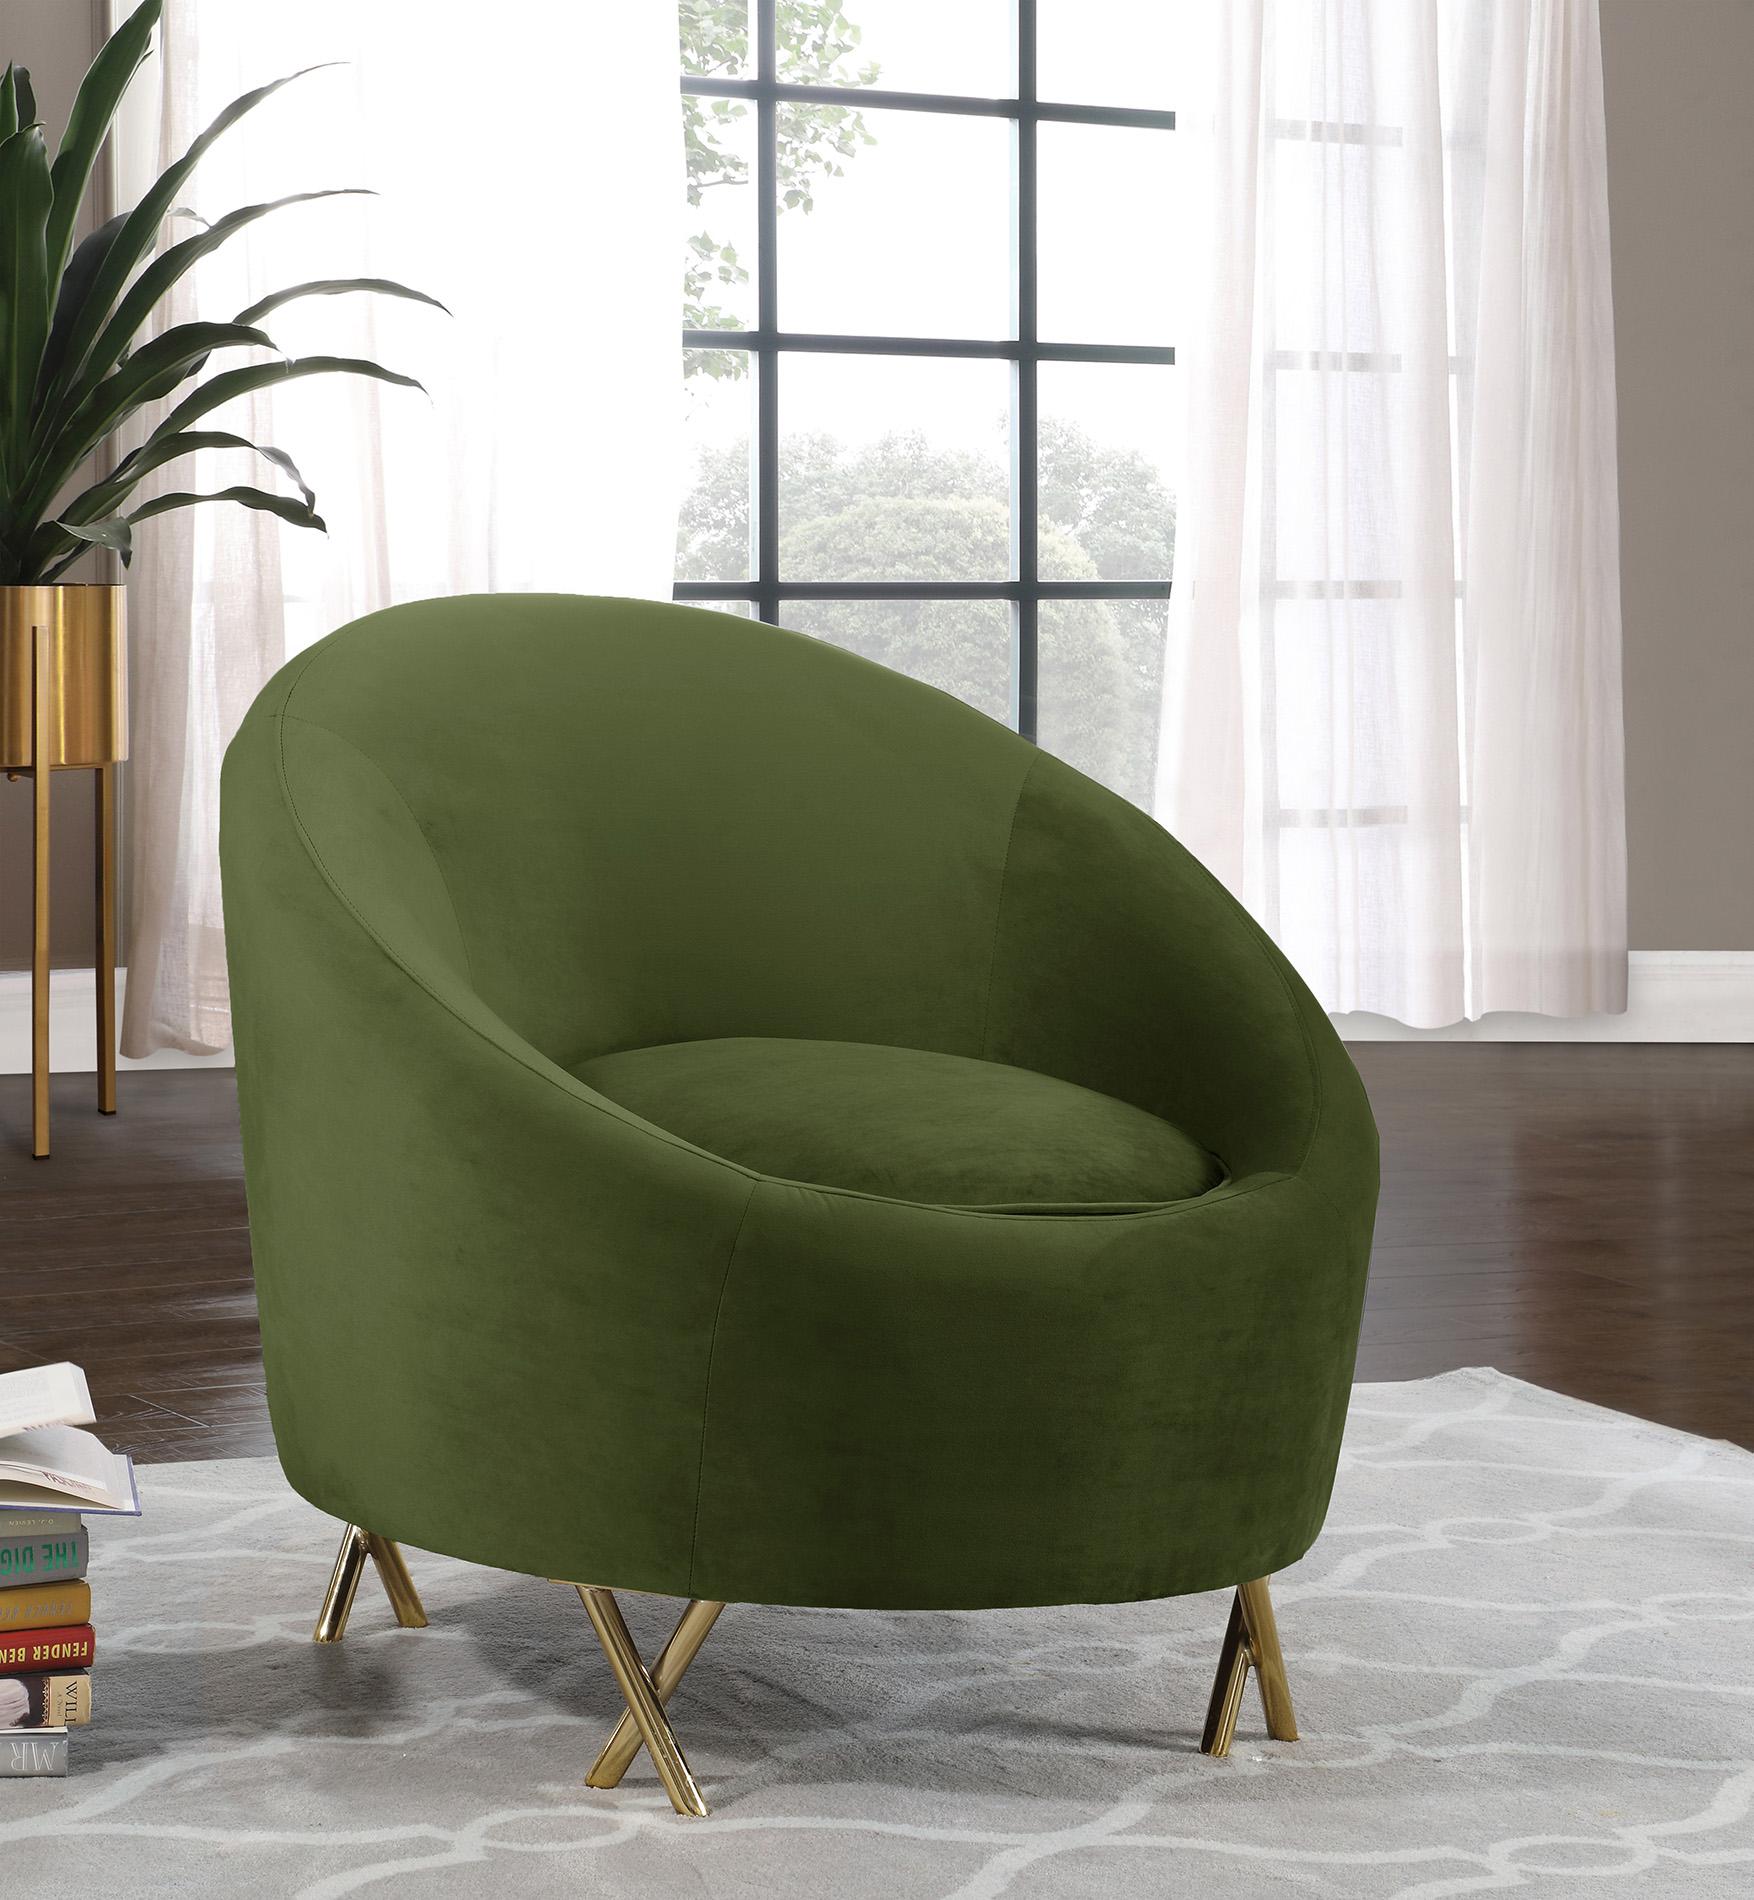 Contemporary, Modern Arm Chair SERPENTINE 679Olive-C 679Olive-C in Olive Velvet